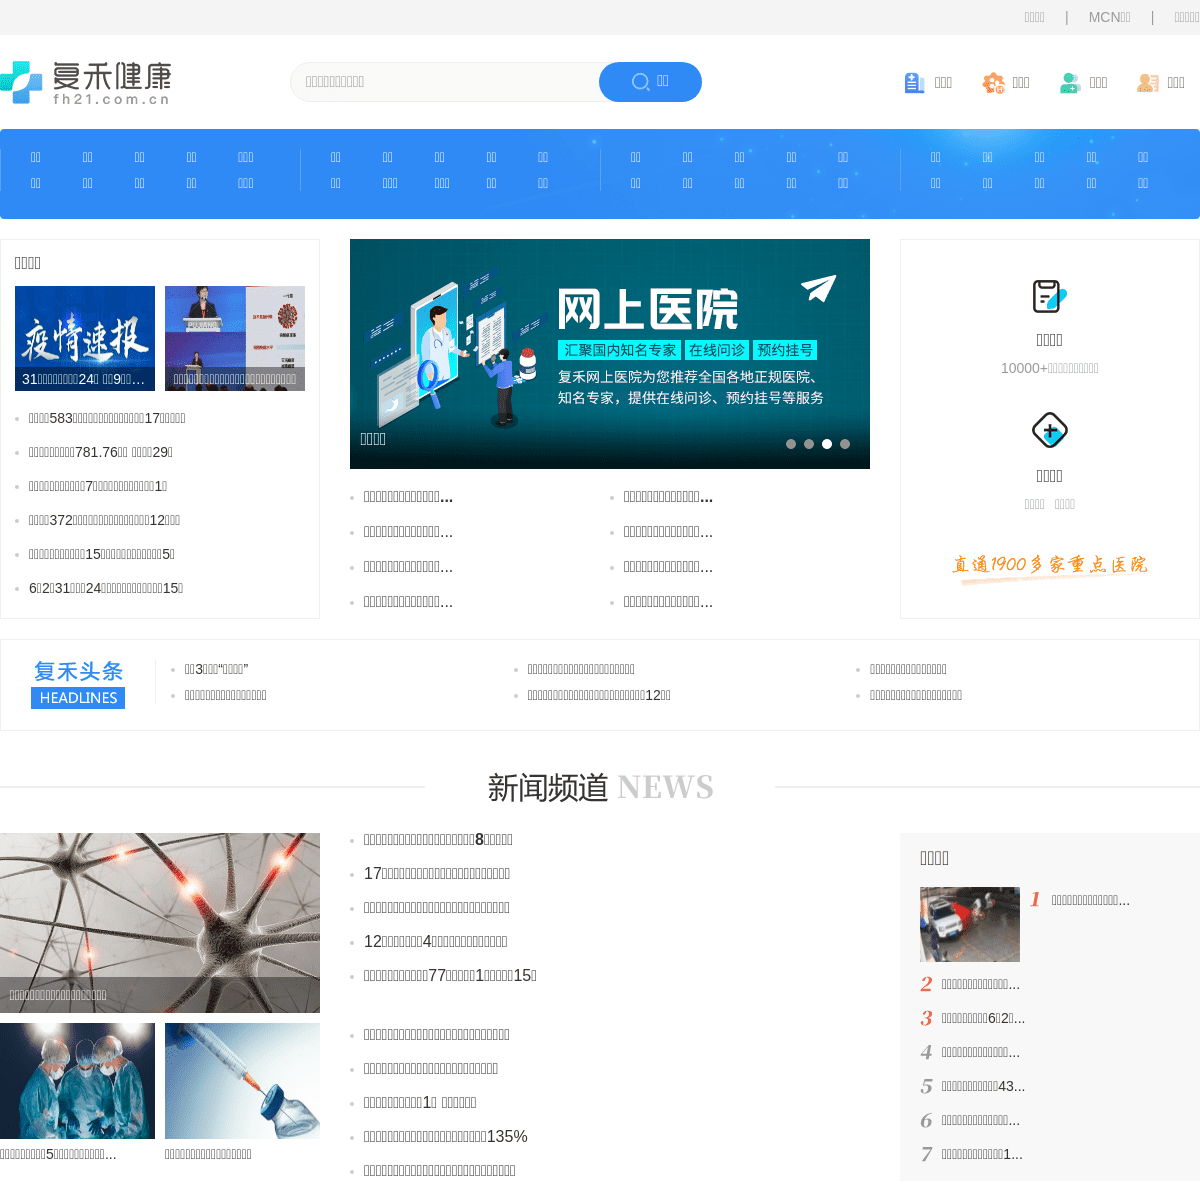 A complete backup of https://fh21.com.cn